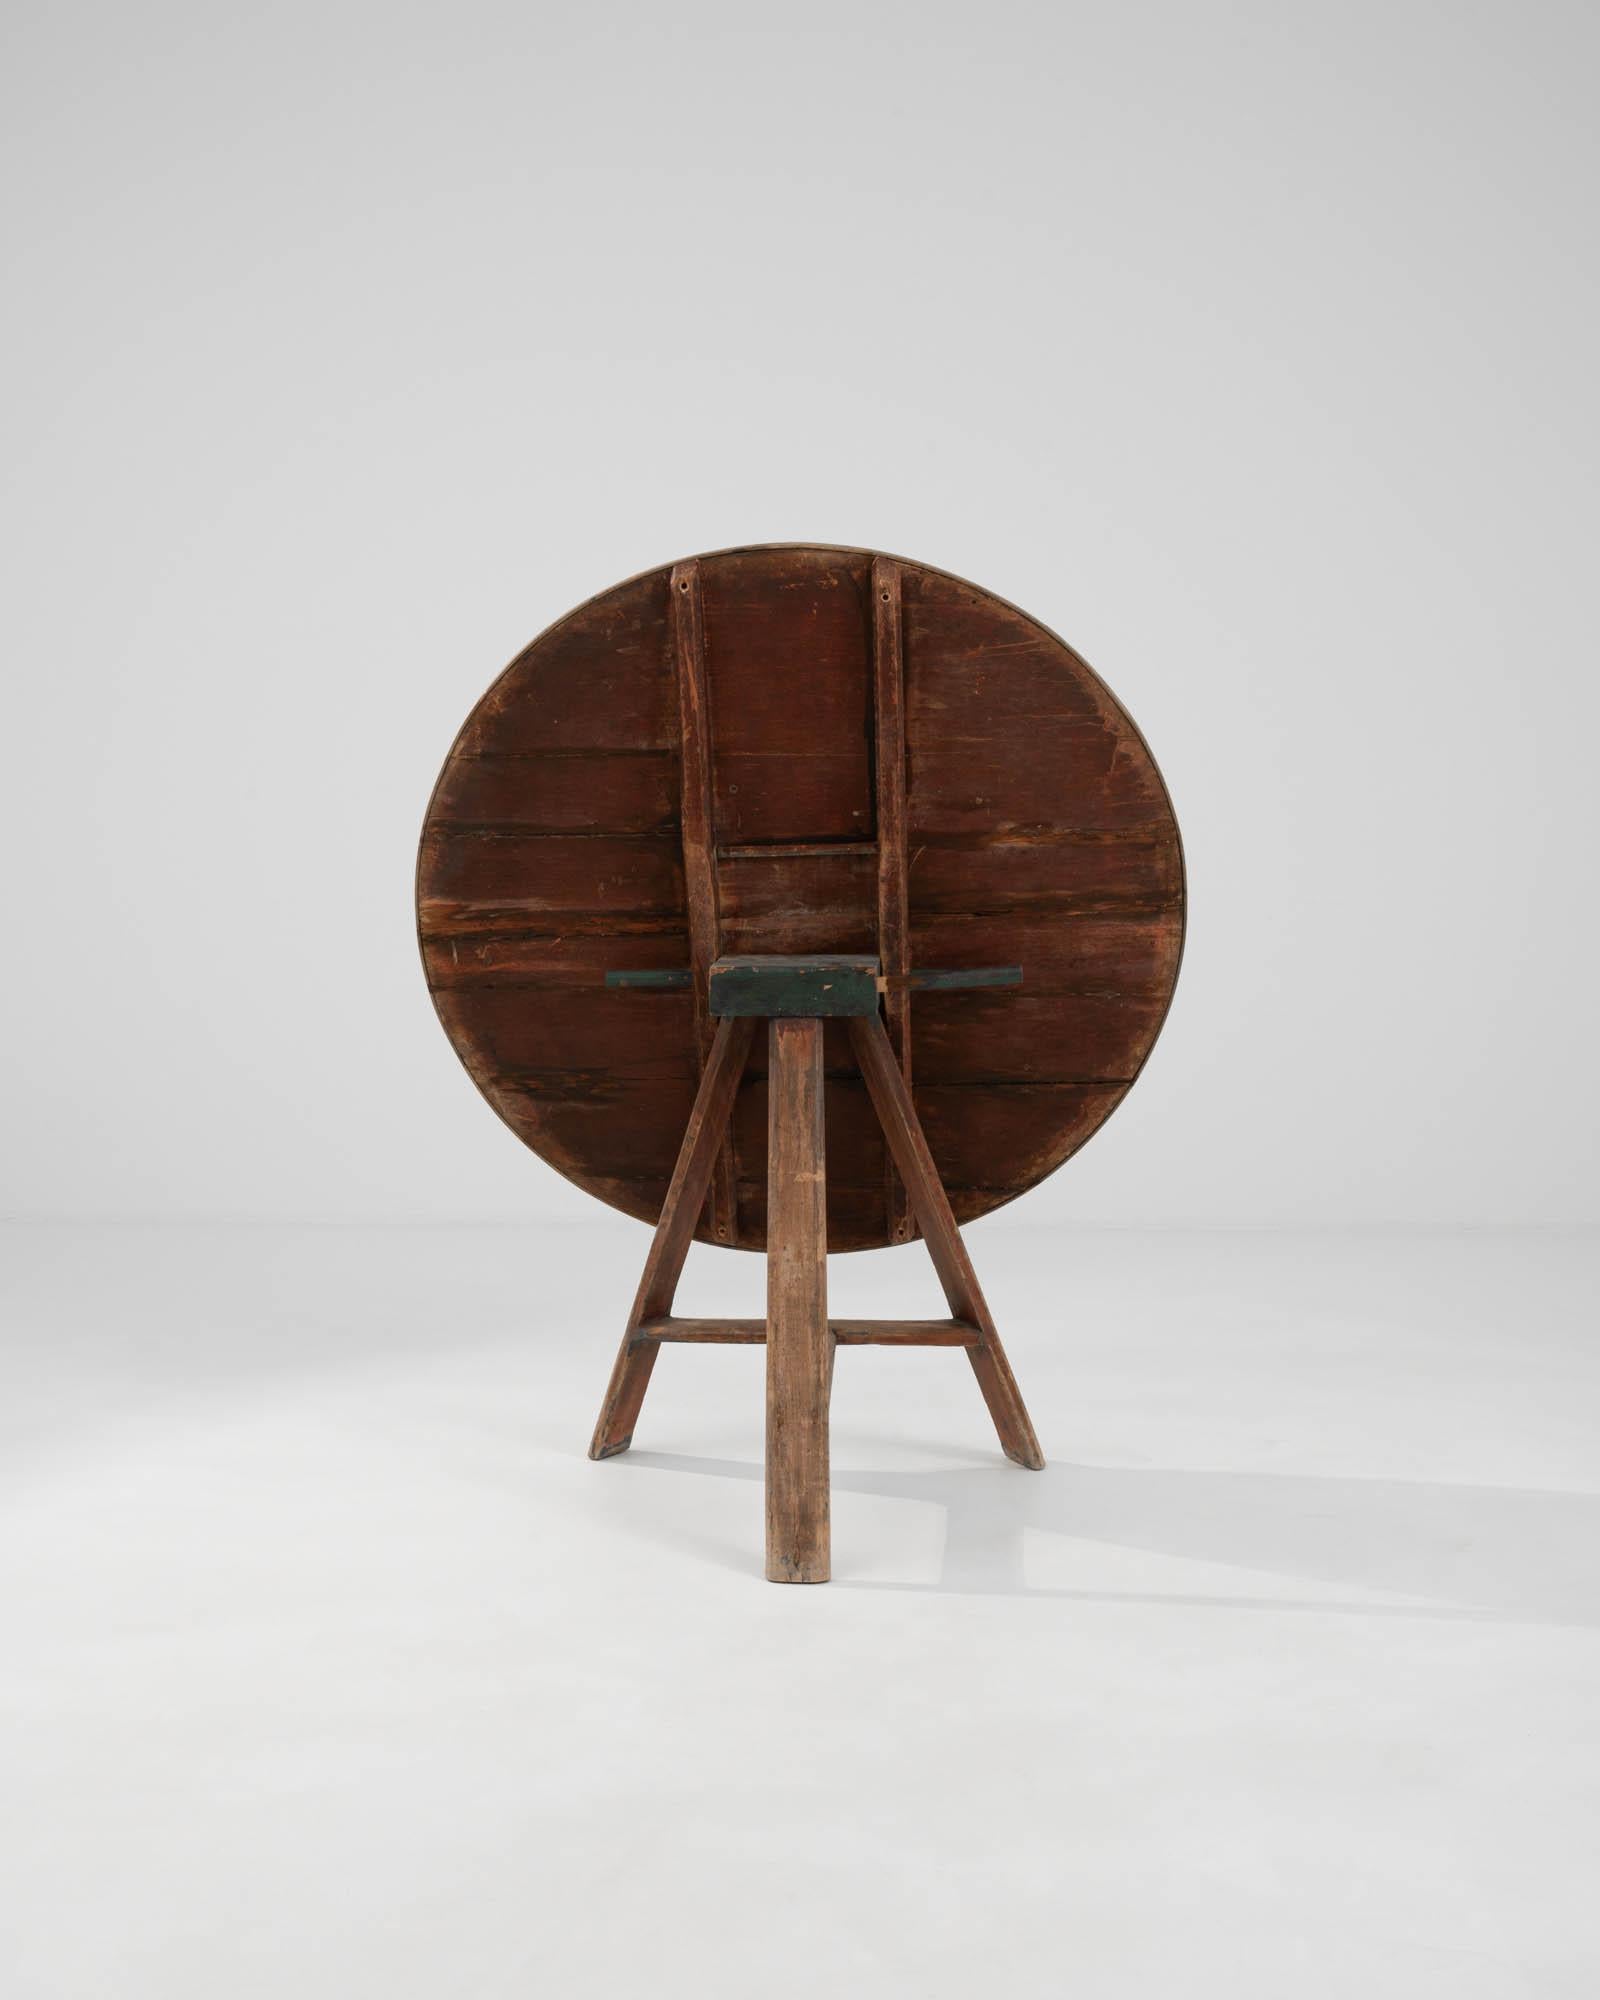 Introducing the 19th Century Dutch Wooden Wine Tasting Table – a piece that instantly conjures images of conviviality and the rustic charm of a bygone era. This unique table, with its circular top and cleverly hinged construction, was a fixture in